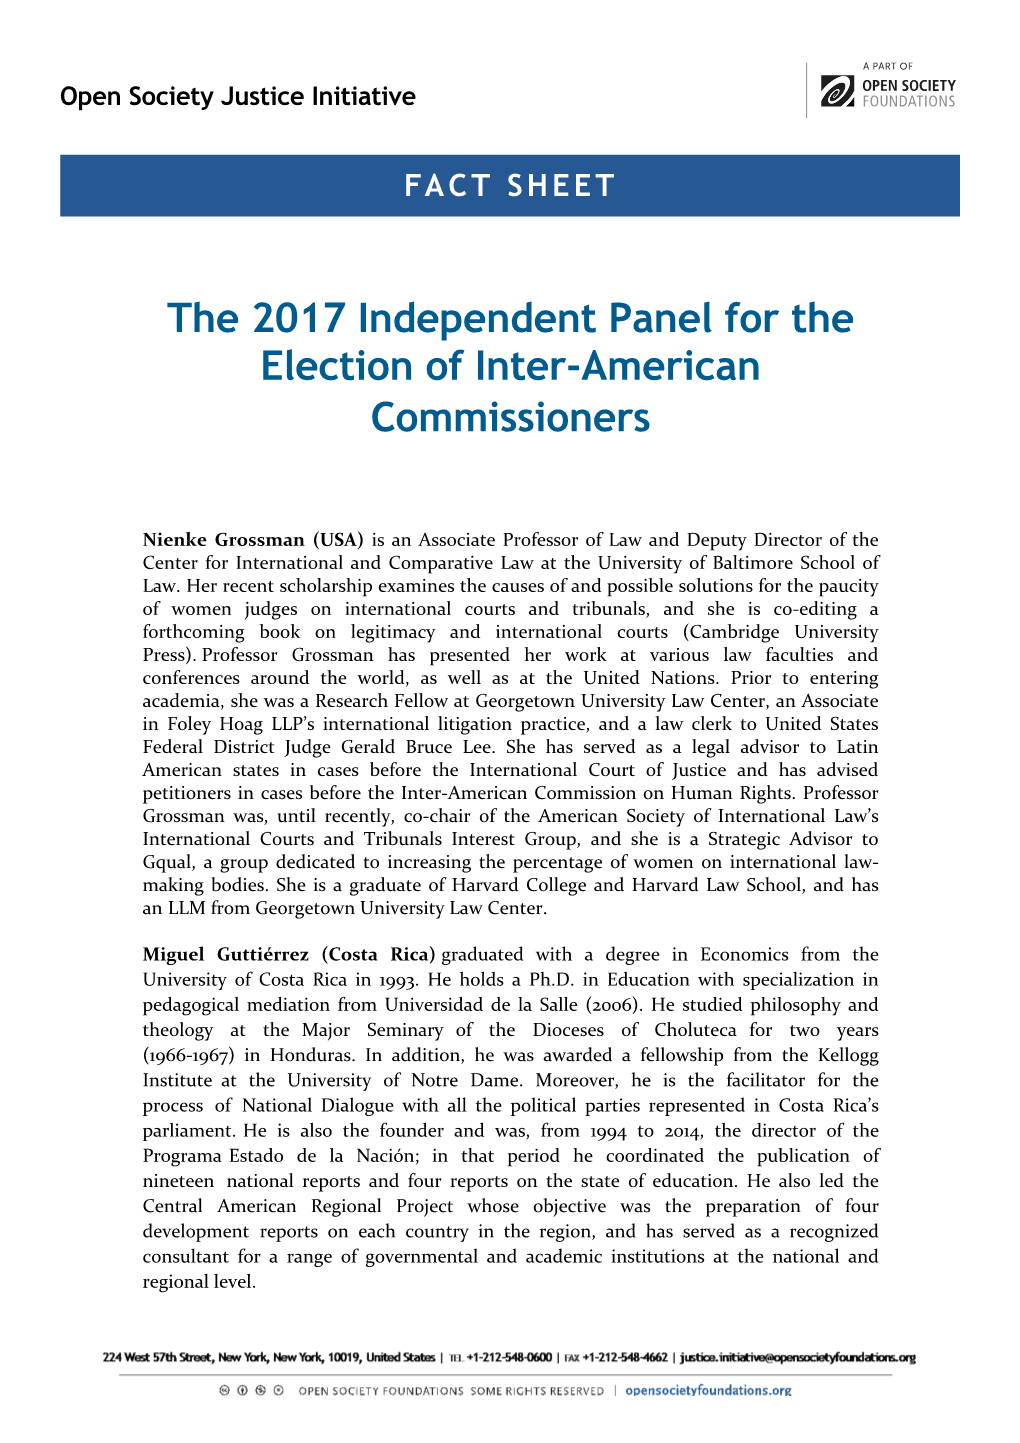 The 2017 Independent Panel for the Election of Inter-American Commissioners